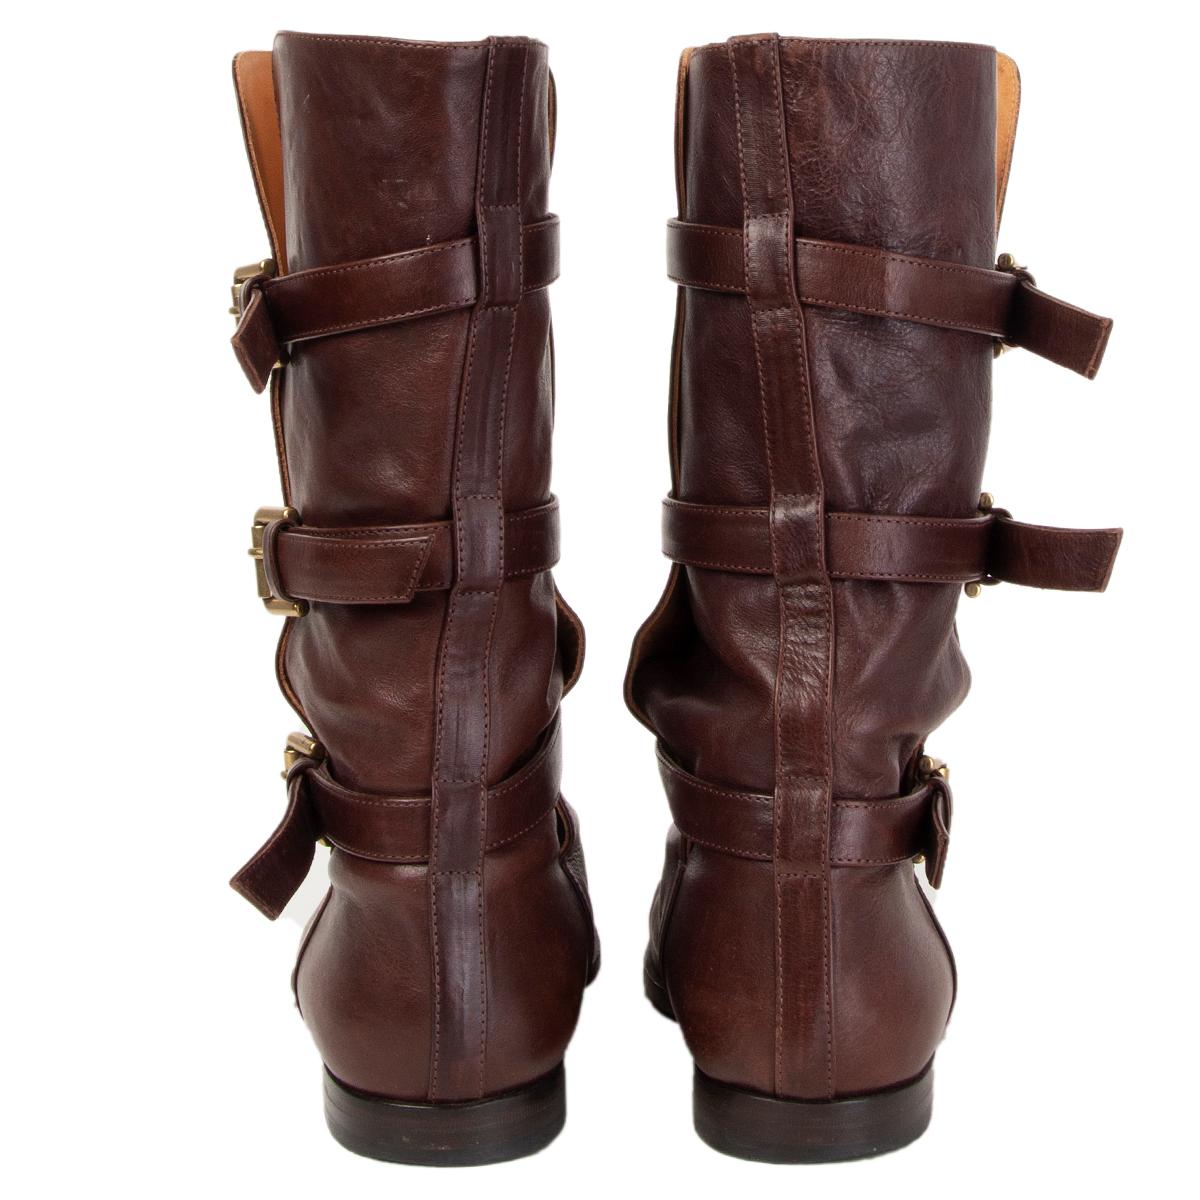 ETRO dark brown leather BUCKLE Mid Calf Flat Boots Shoes 40 In Excellent Condition For Sale In Zürich, CH